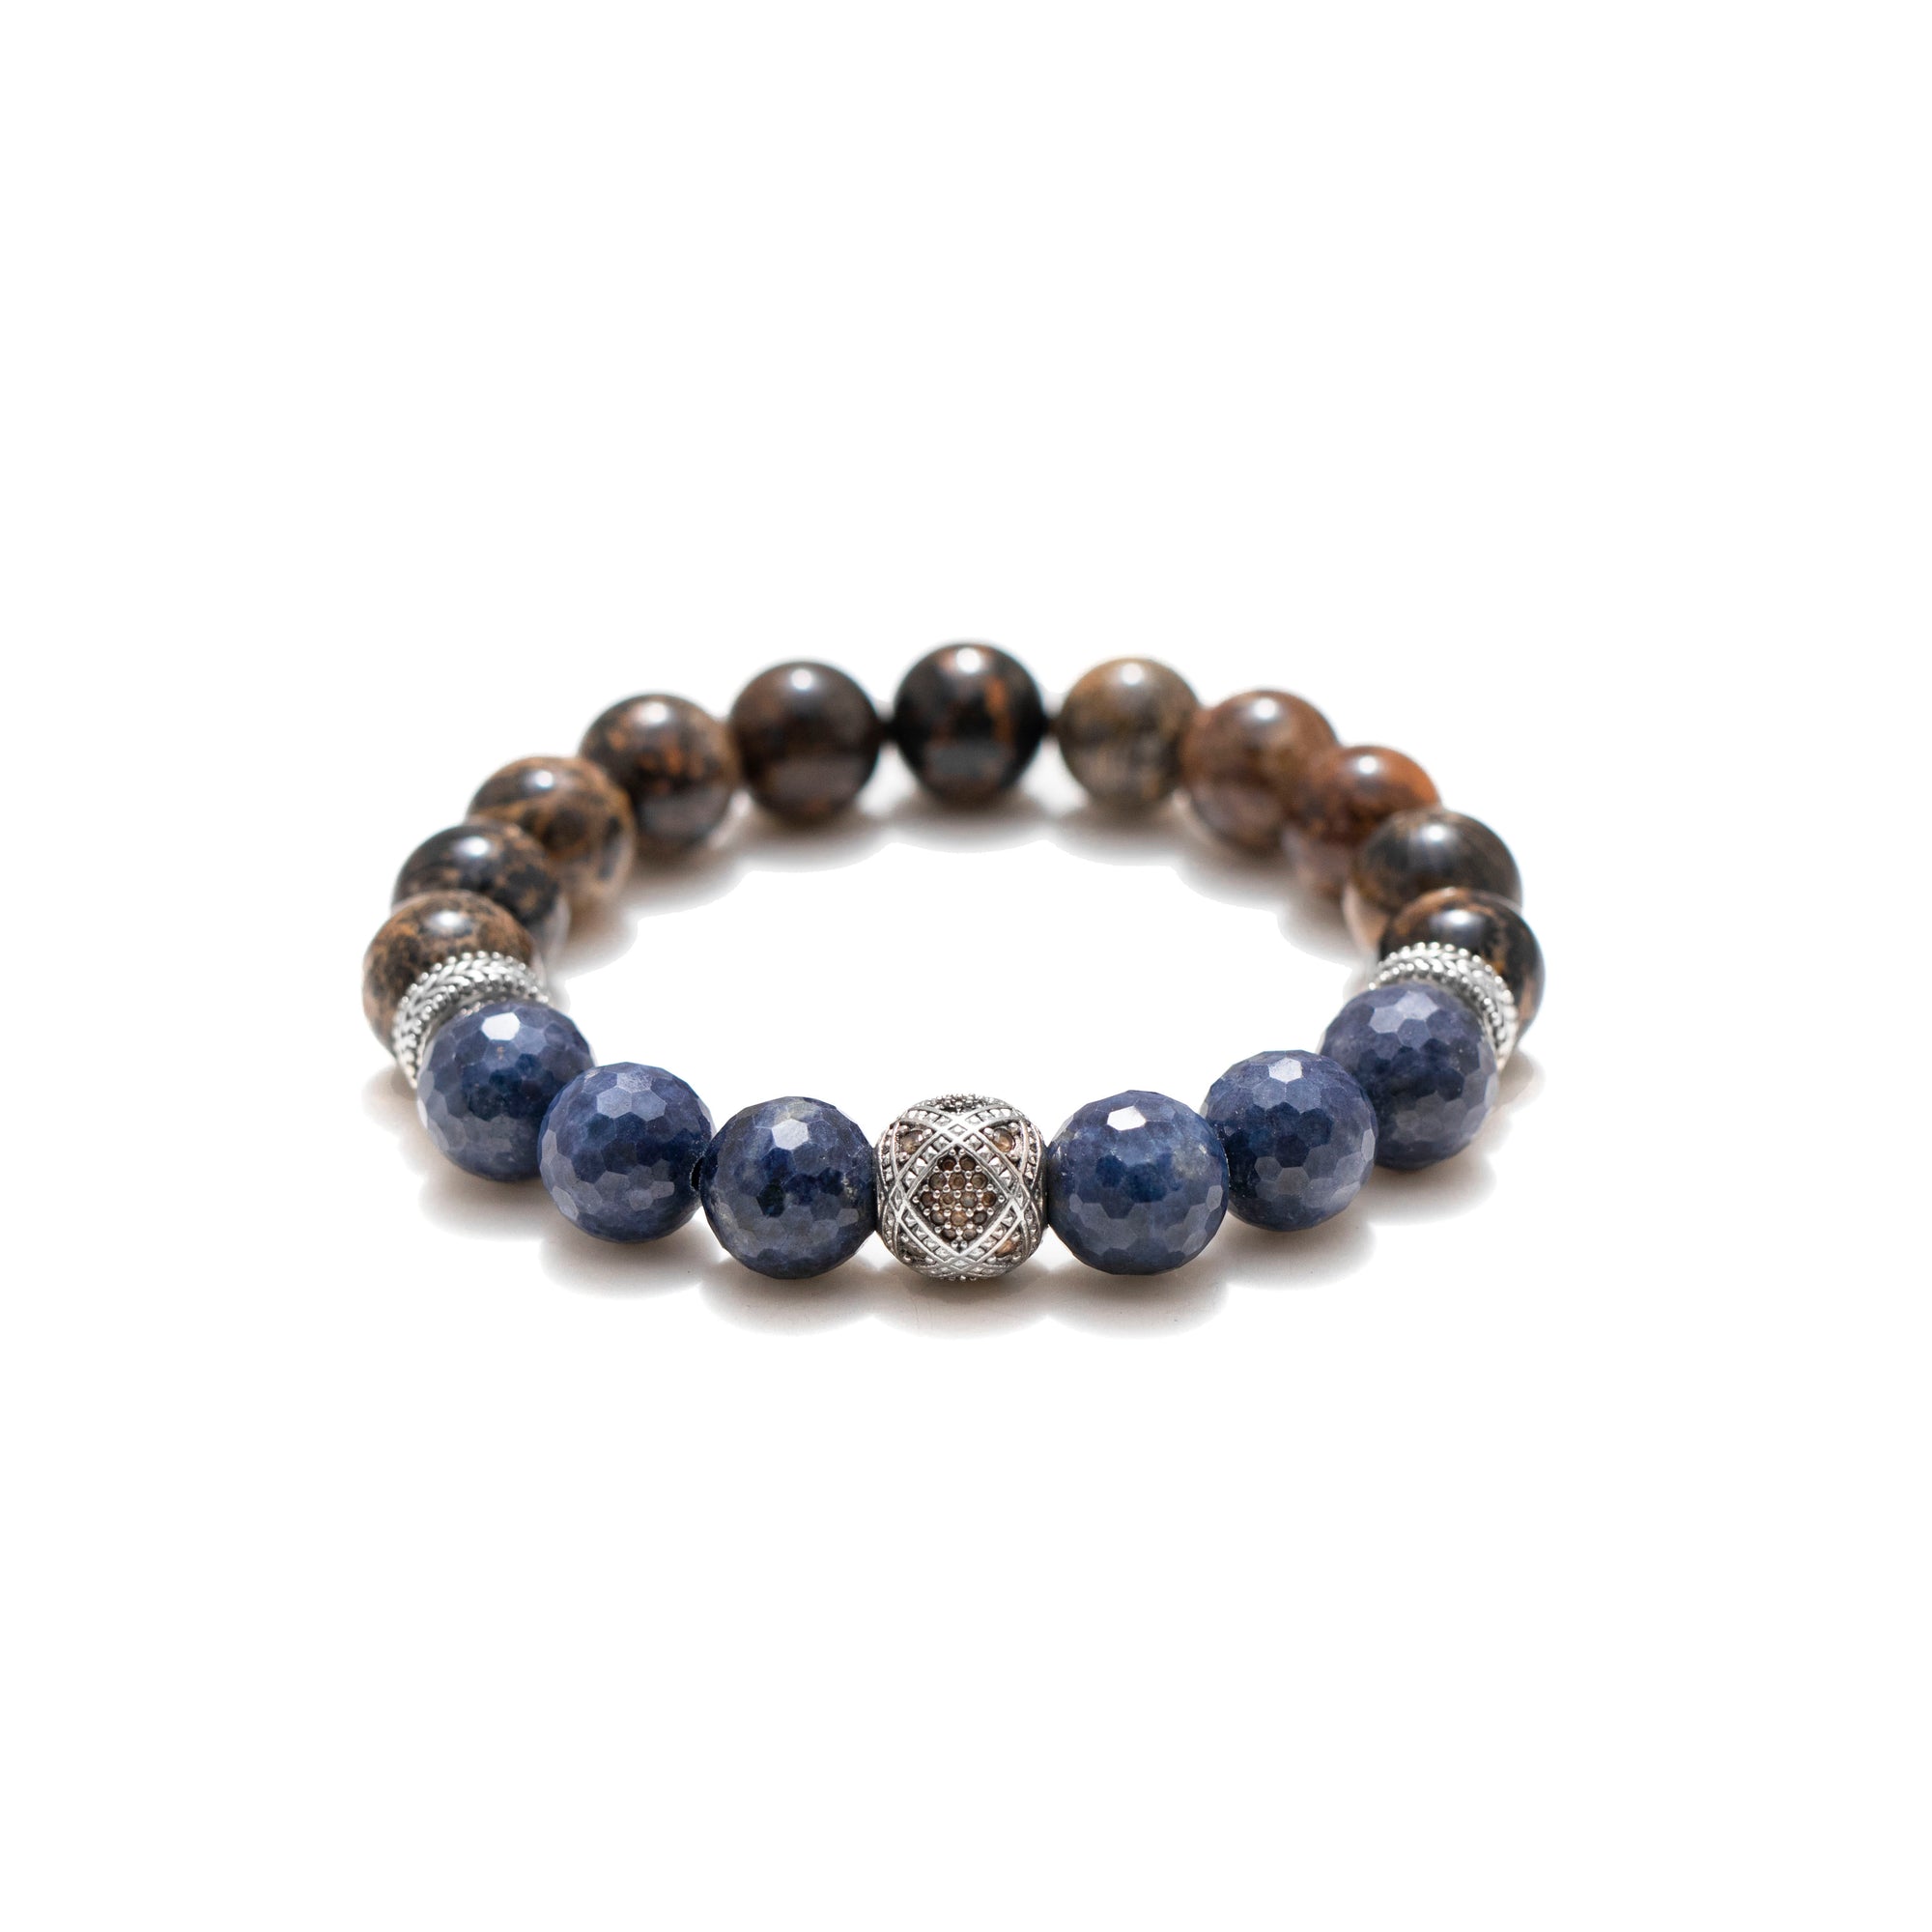 Beaded Sterling Silver Geometrical Focal Bead, Rare Fossil Coral & Blue Sapphire Bracelet